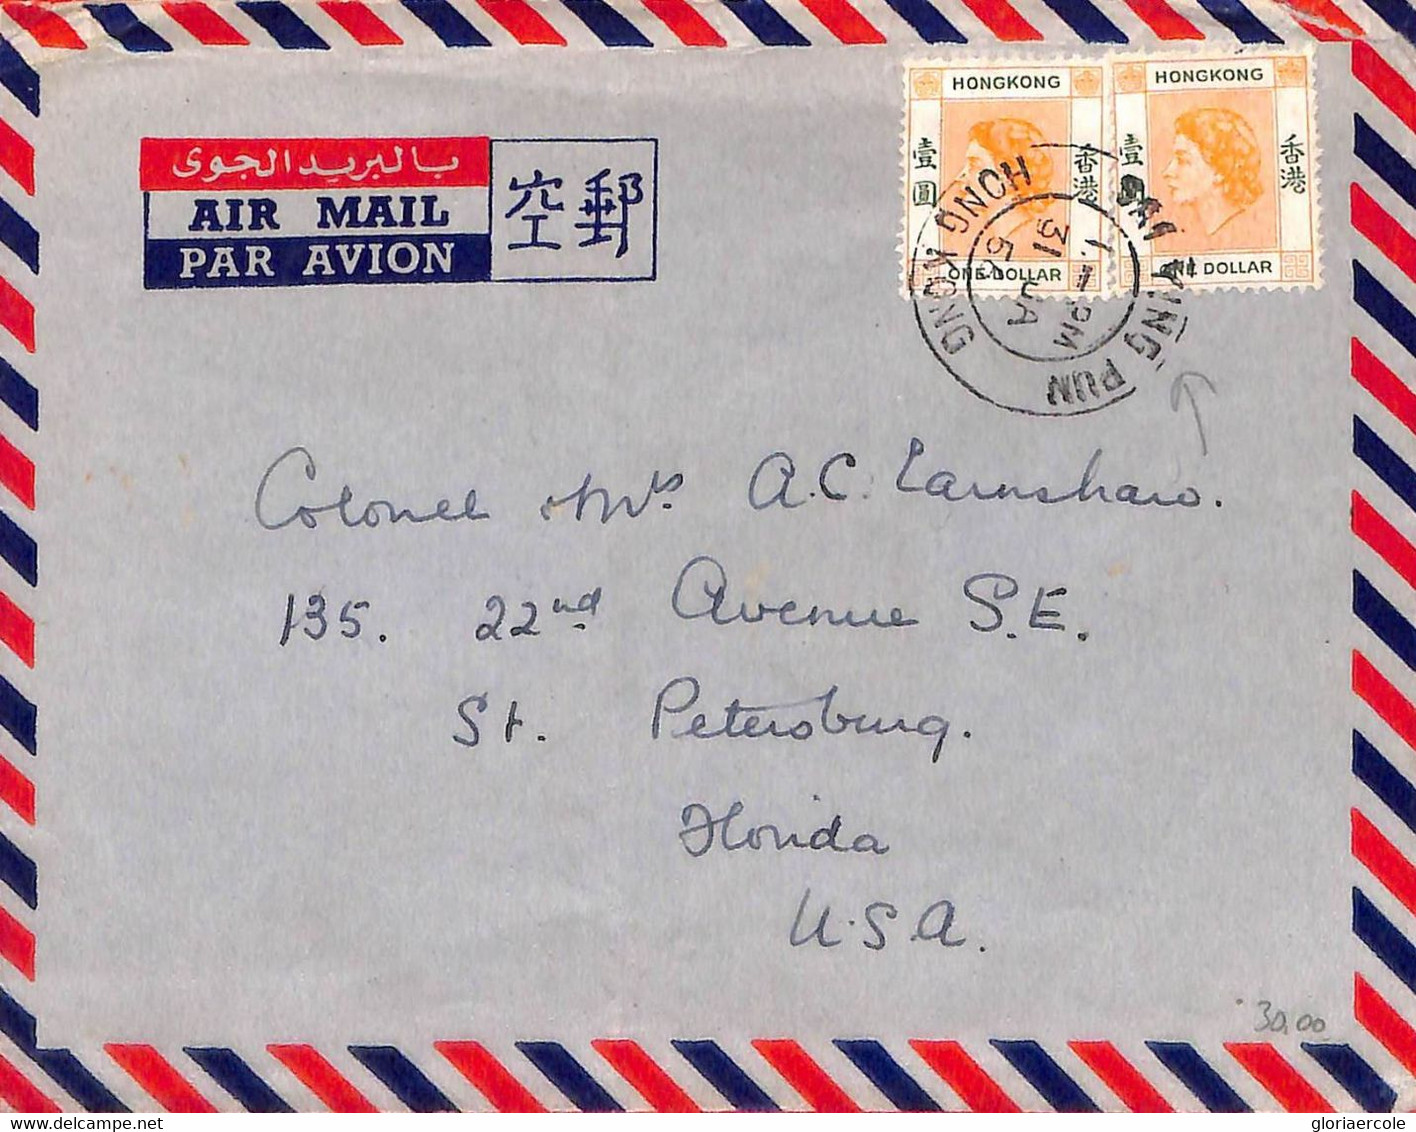 Aa6814 - HONG KONG - POSTAL HISTORY -  COVER From SAI YUNG PUN To The USA  1956 - Covers & Documents